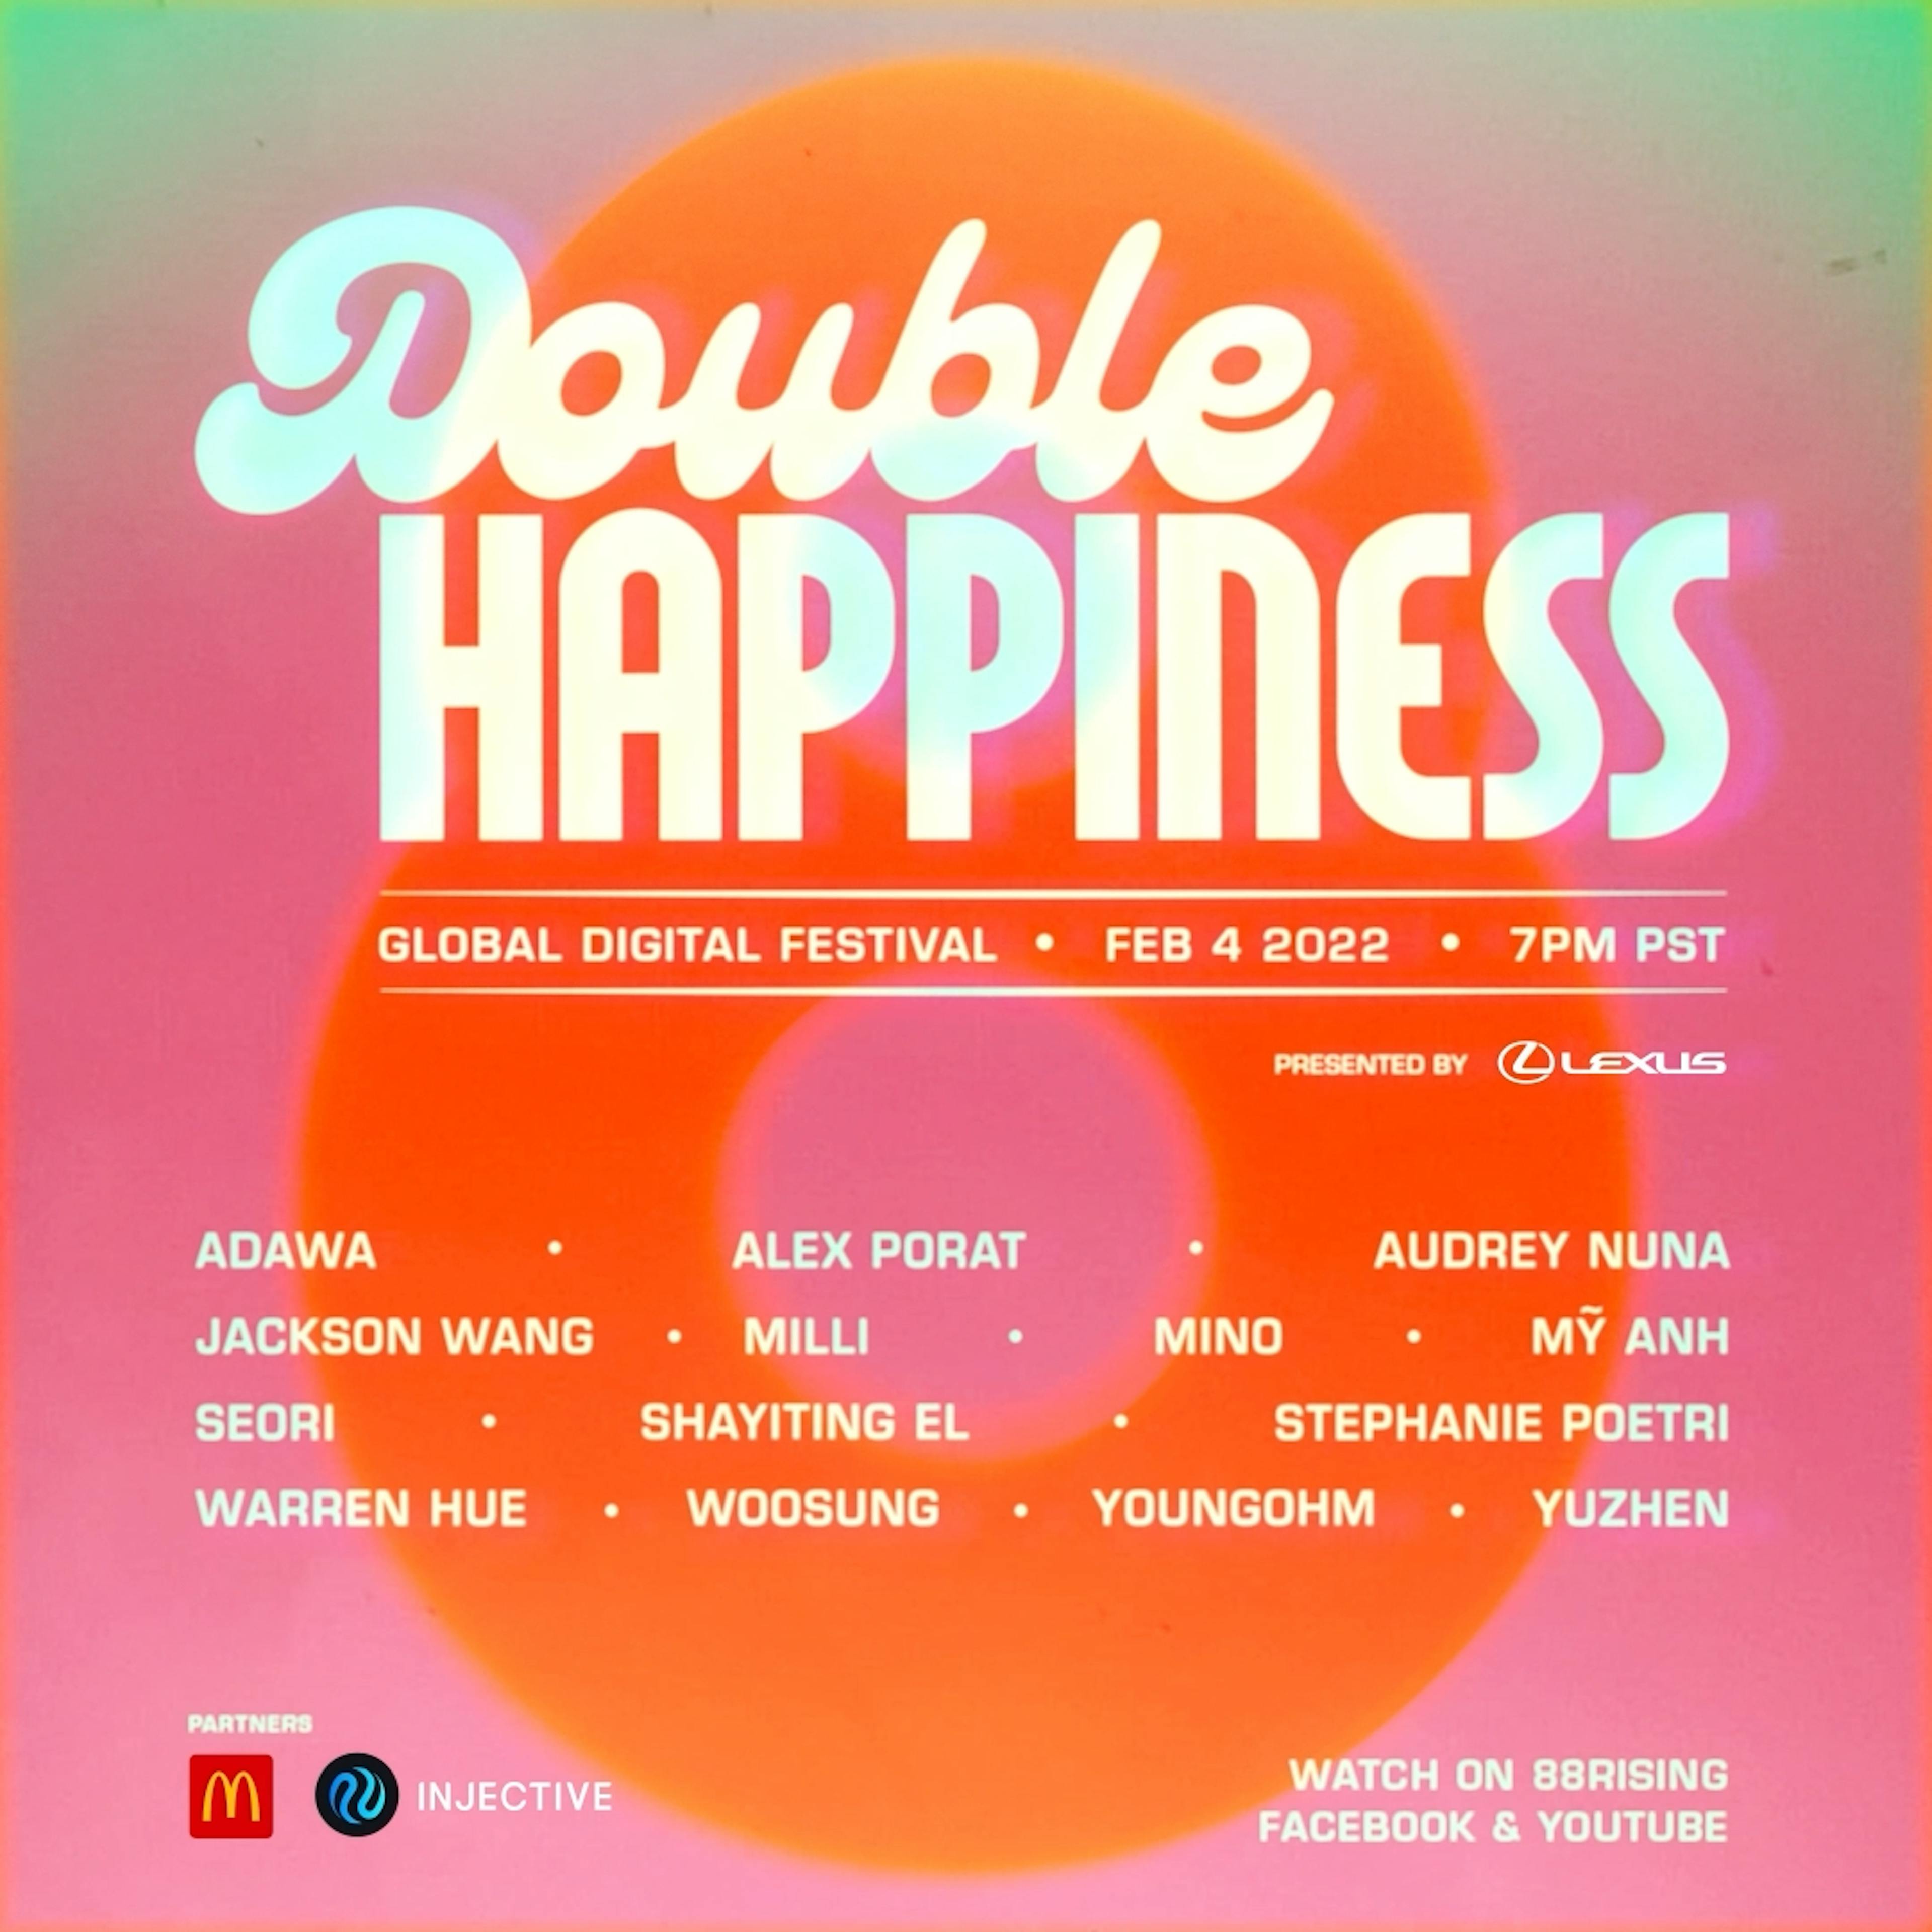 A vibrant graphic for the 'Double Happiness Global Digital Festival' taking place on February 4, 2022, at 7 PM PST. The graphic has a retro aesthetic with a warm, orange and pink gradient background overlaid with a large, soft-focus orange circle in the center, resembling a setting sun. The title 'Double Happiness' is prominently displayed in a playful, white cursive font at the top. Below, in smaller white font, event details are provided, followed by a list of artists such as ADWA, ALEX PORAT, AUDREY NUNA, JACKSON WANG, and others. The bottom notes partners like McDonald's and Injective, with the Lexus logo indicating sponsorship, and mentions that the event is available to watch on 88rising's Facebook and YouTube channels.